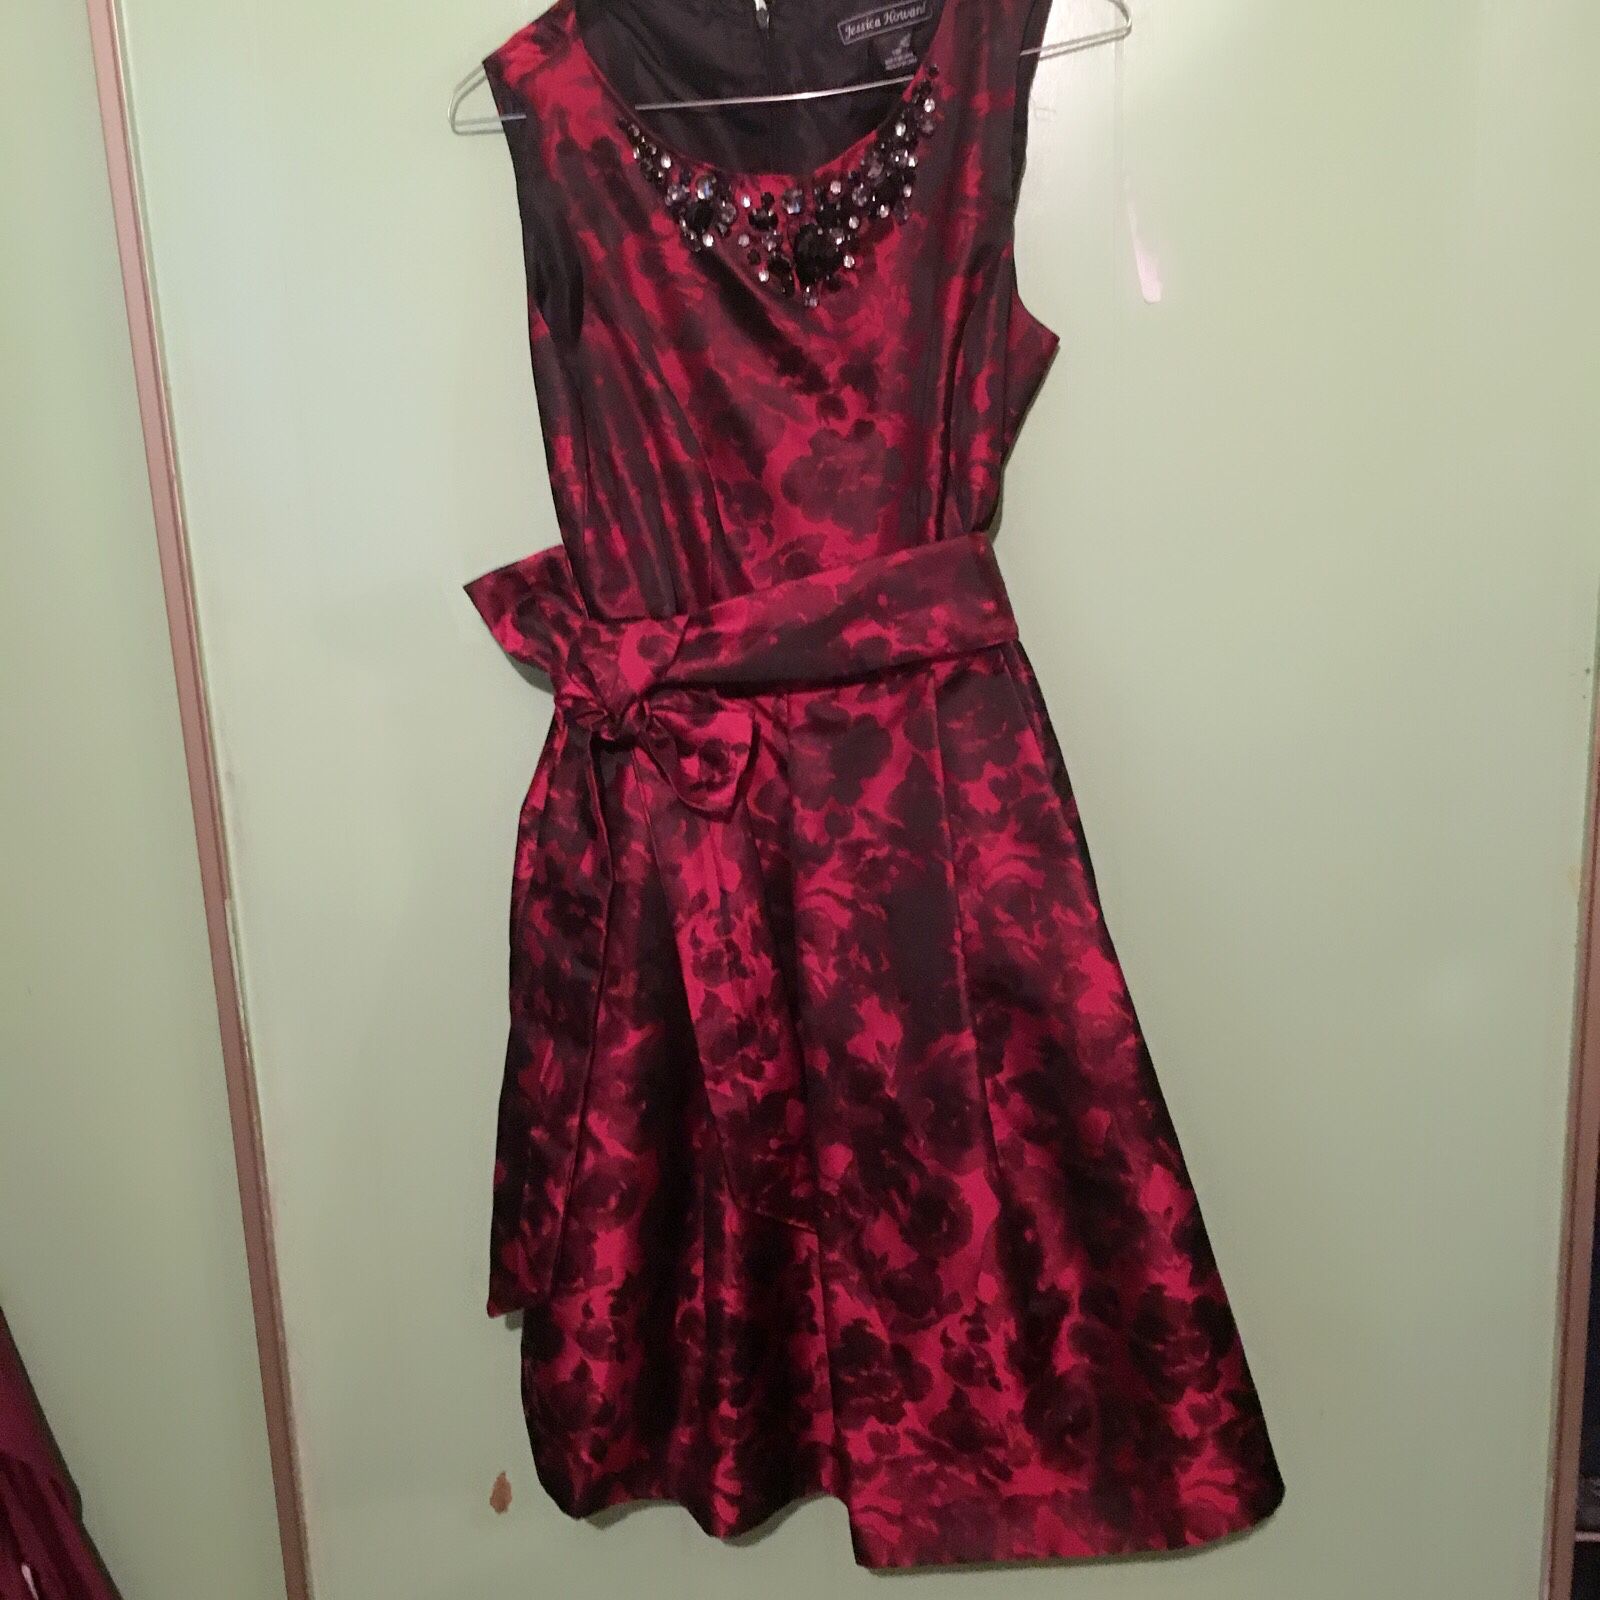 Dress 👗 red and black..size 10 P women’s